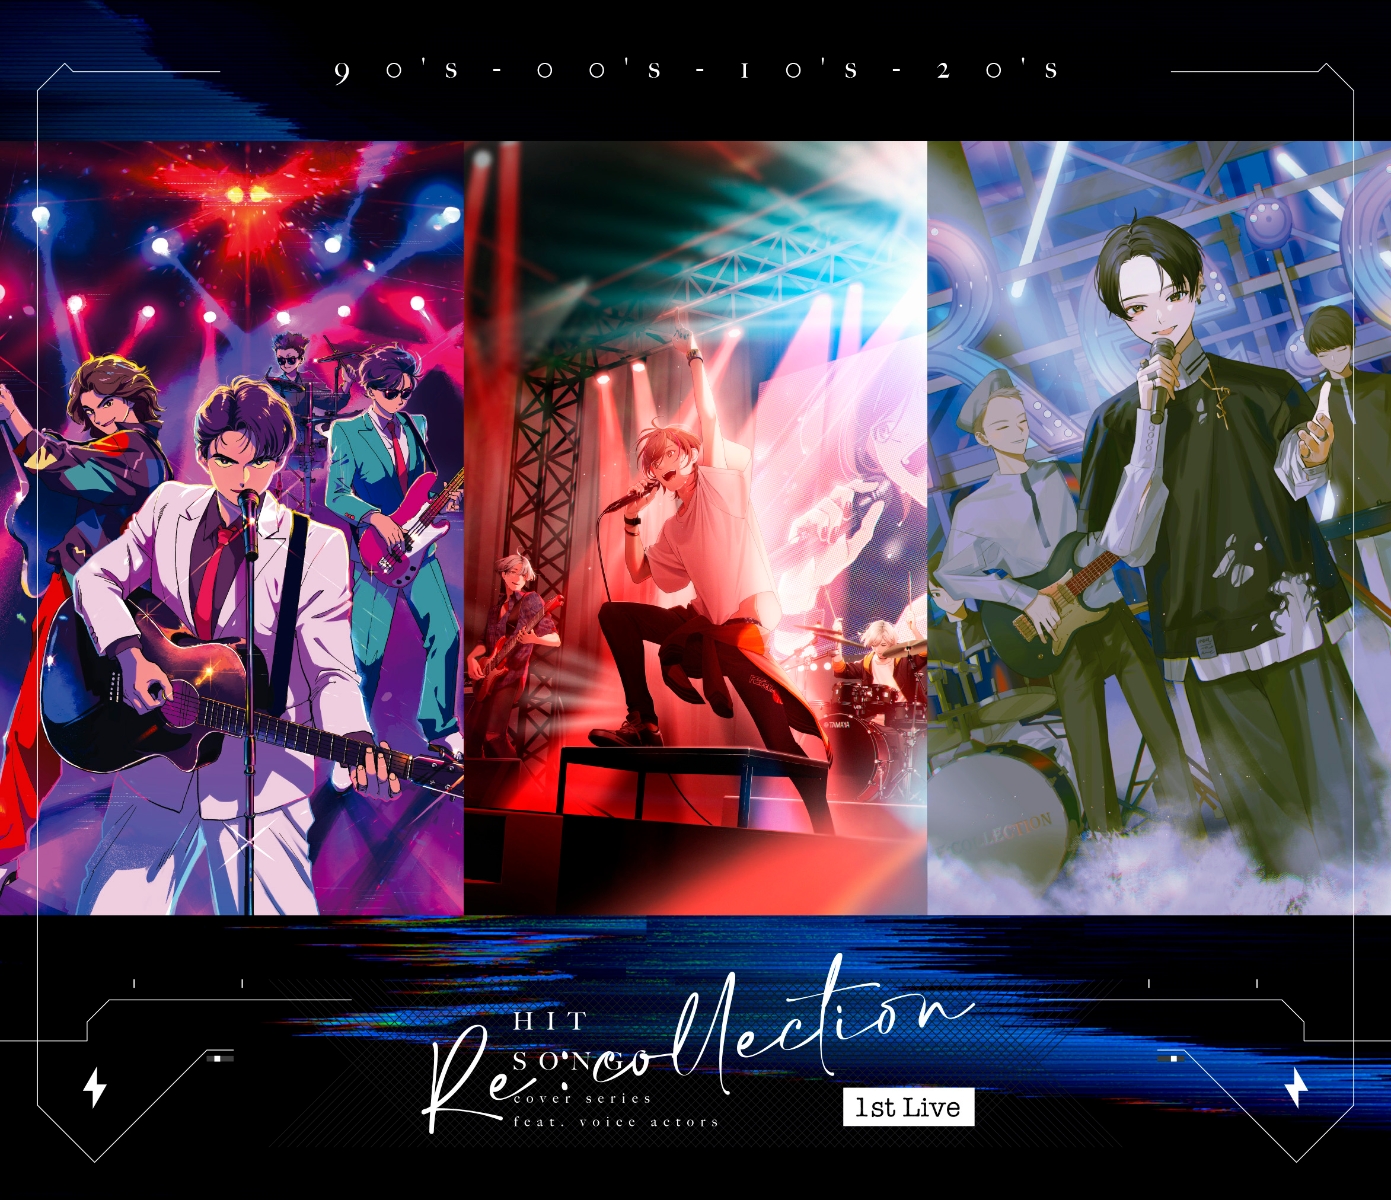 [Re:collection] HIT SONG cover series feat.voice actors 1st Live Blu-ray【Blu-ray】画像